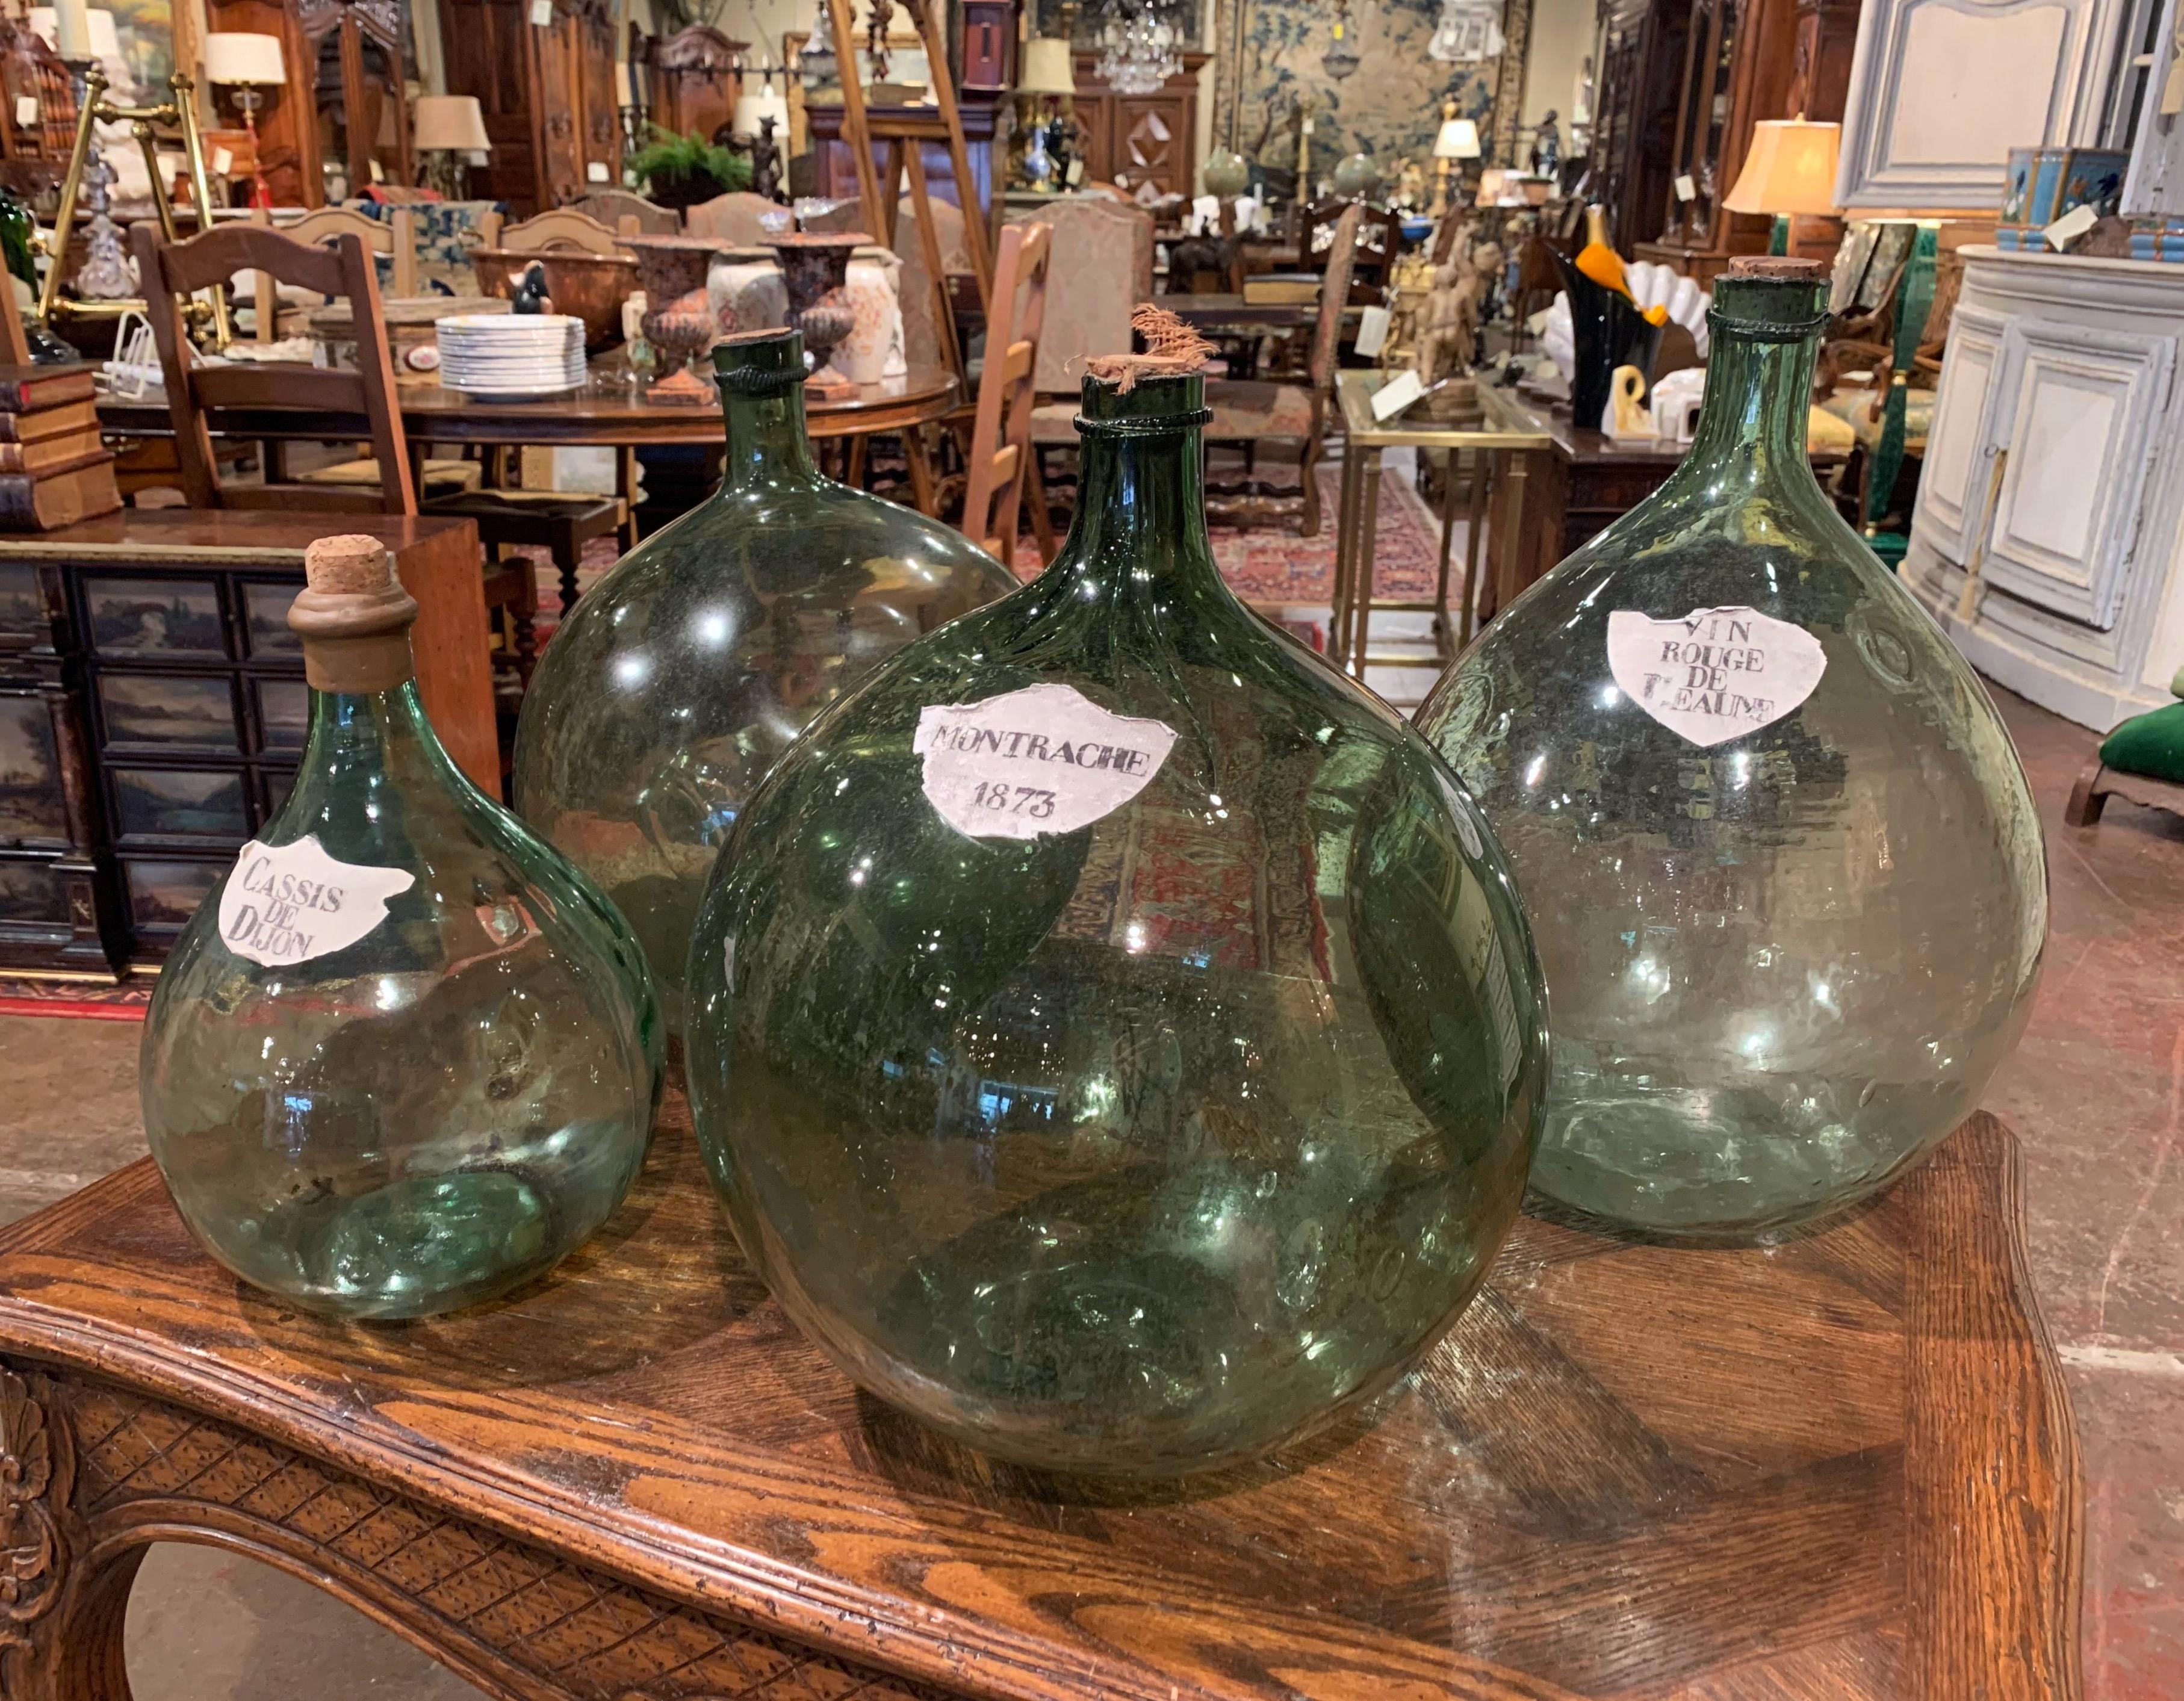 Decorate a wine cellar with these Classic French wine bottles or place them over kitchen cabinets! Hand blown in France circa 1880, the glass bottles are beautifully decorated with a painted paper label, including 